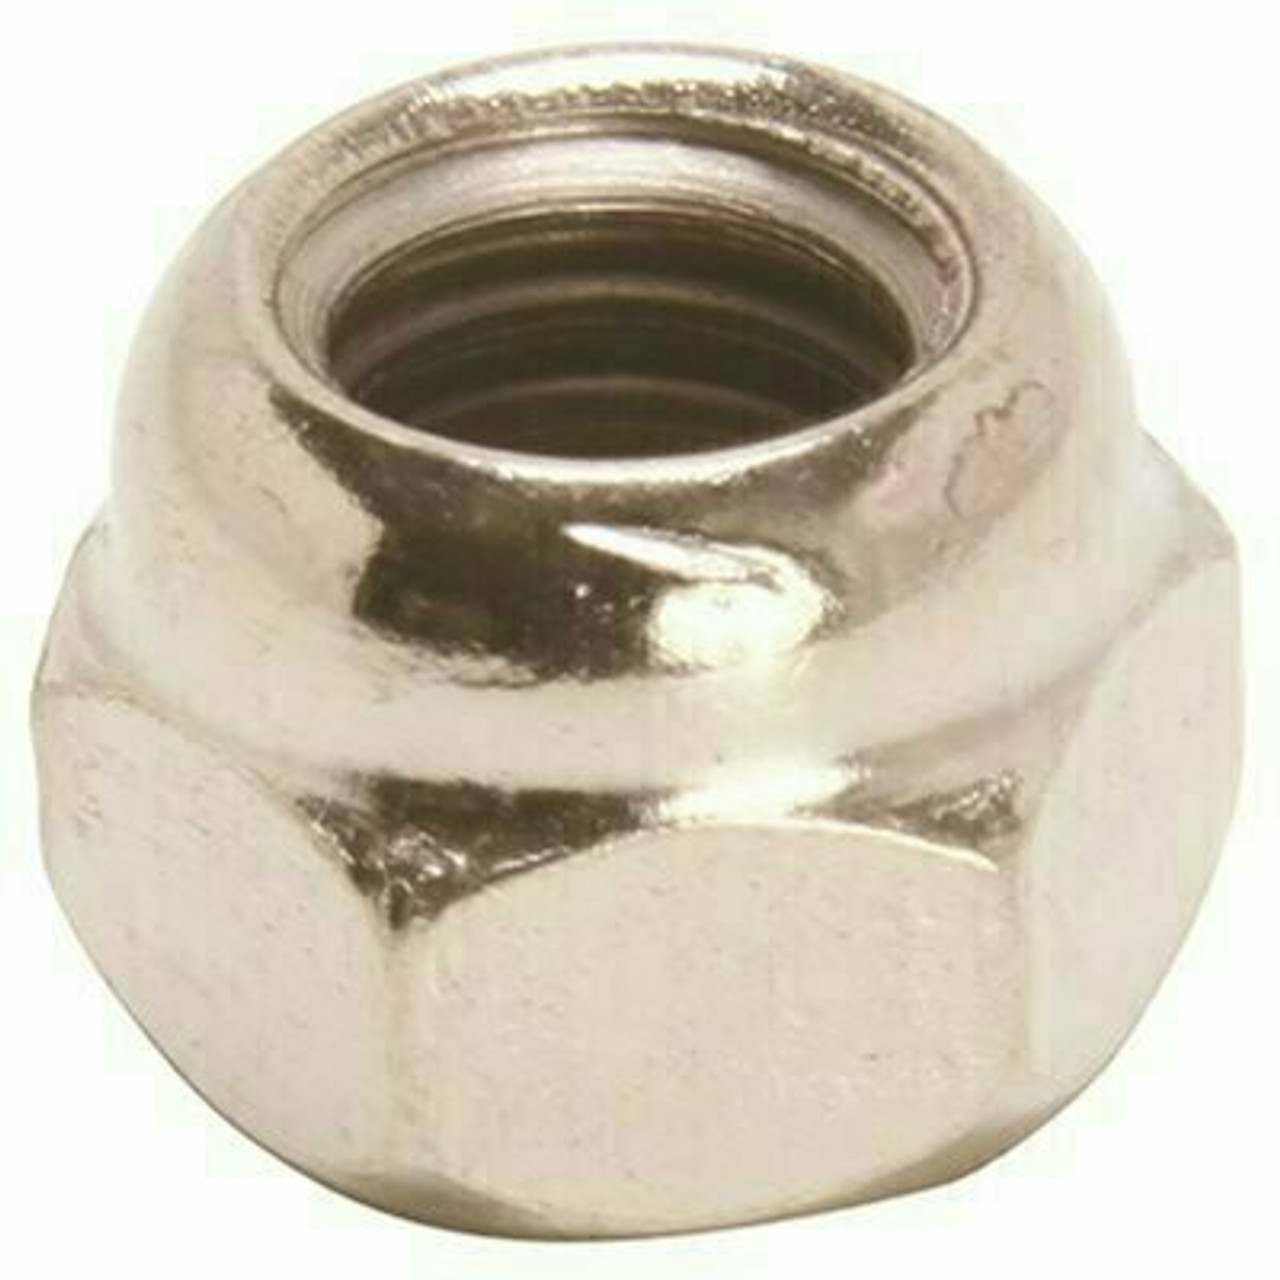 Proplus 5/16 In. Nut For Closet Bolt